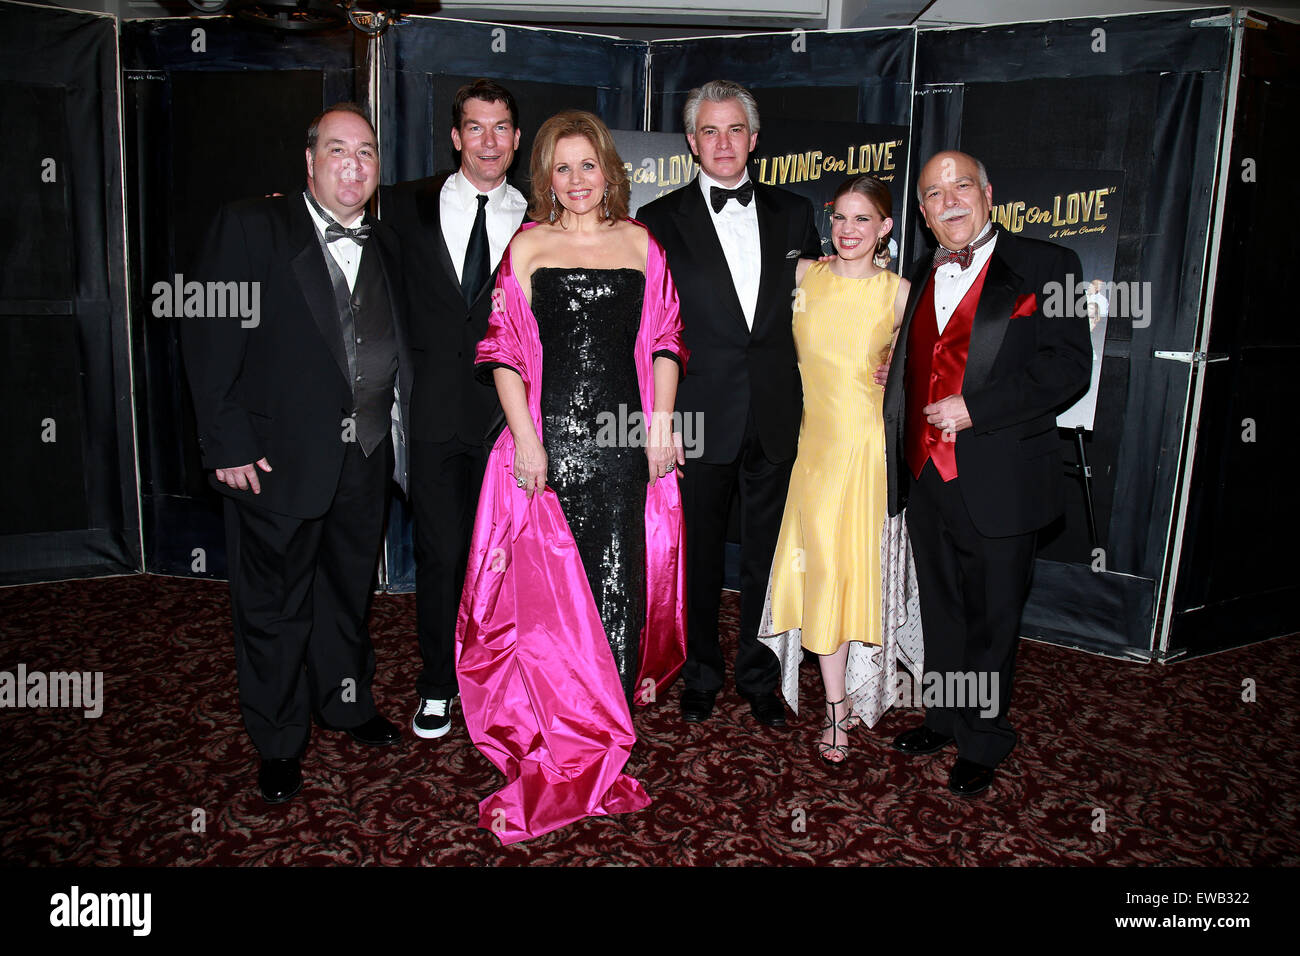 Opening night after party for Living On Love held at Sardi's restaurant - Arrivals.  Featuring: Blake Hammond, Jerry O'Connell, Renee Fleming, Douglas Sills, Anna Chlumsky, Scott Robertson Where: New York City, New York, United States When: 20 Apr 2015 Stock Photo